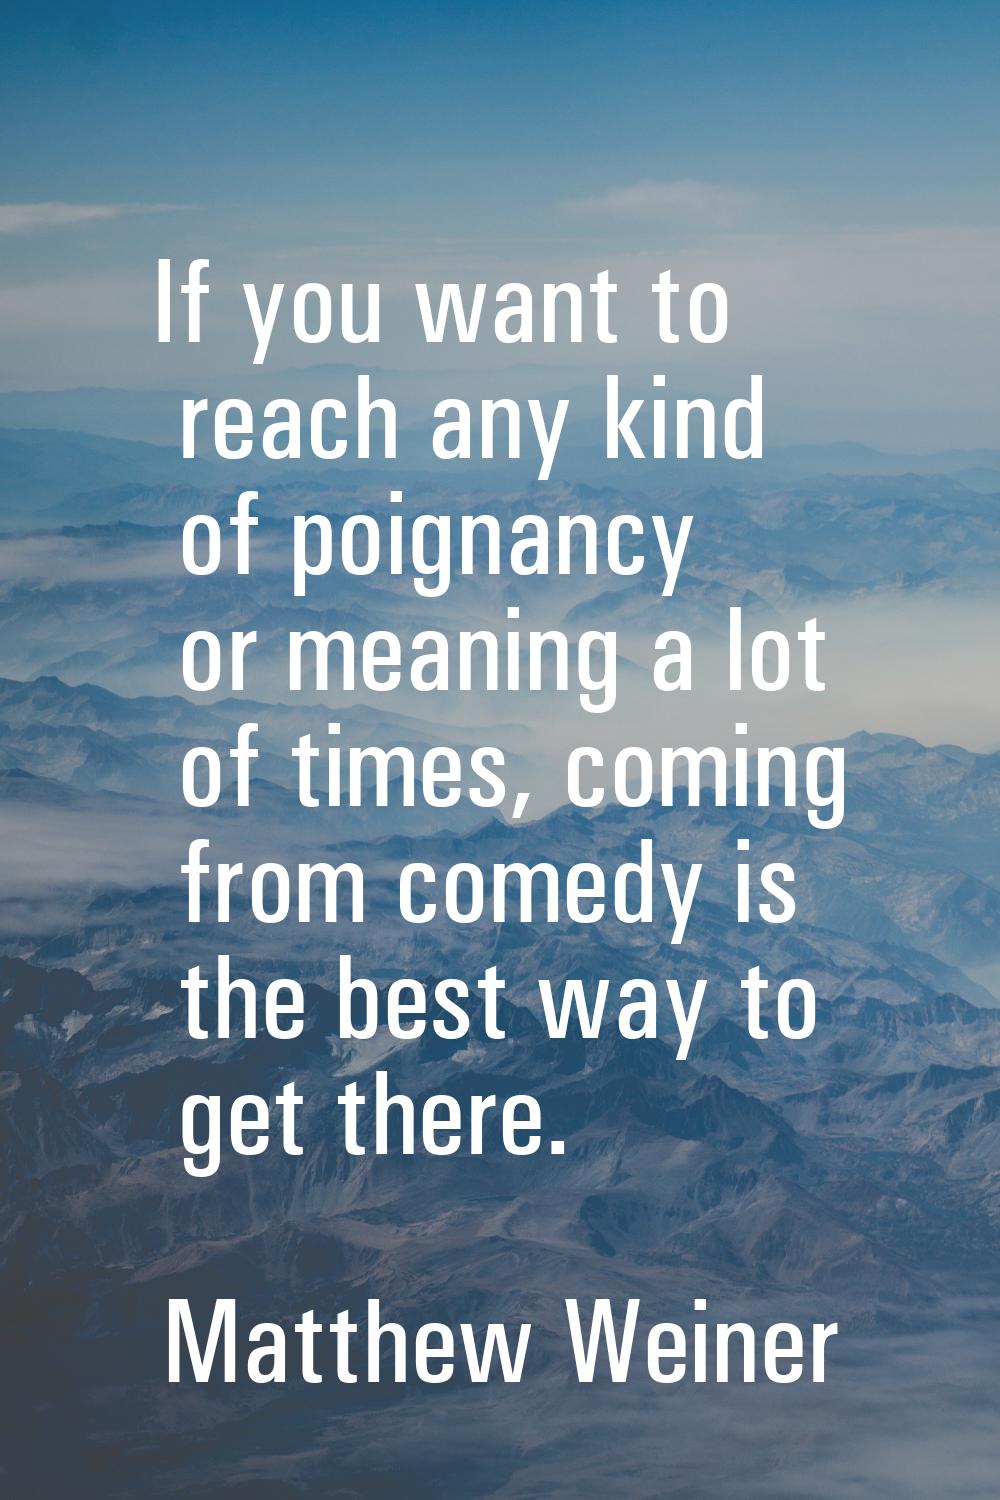 If you want to reach any kind of poignancy or meaning a lot of times, coming from comedy is the bes